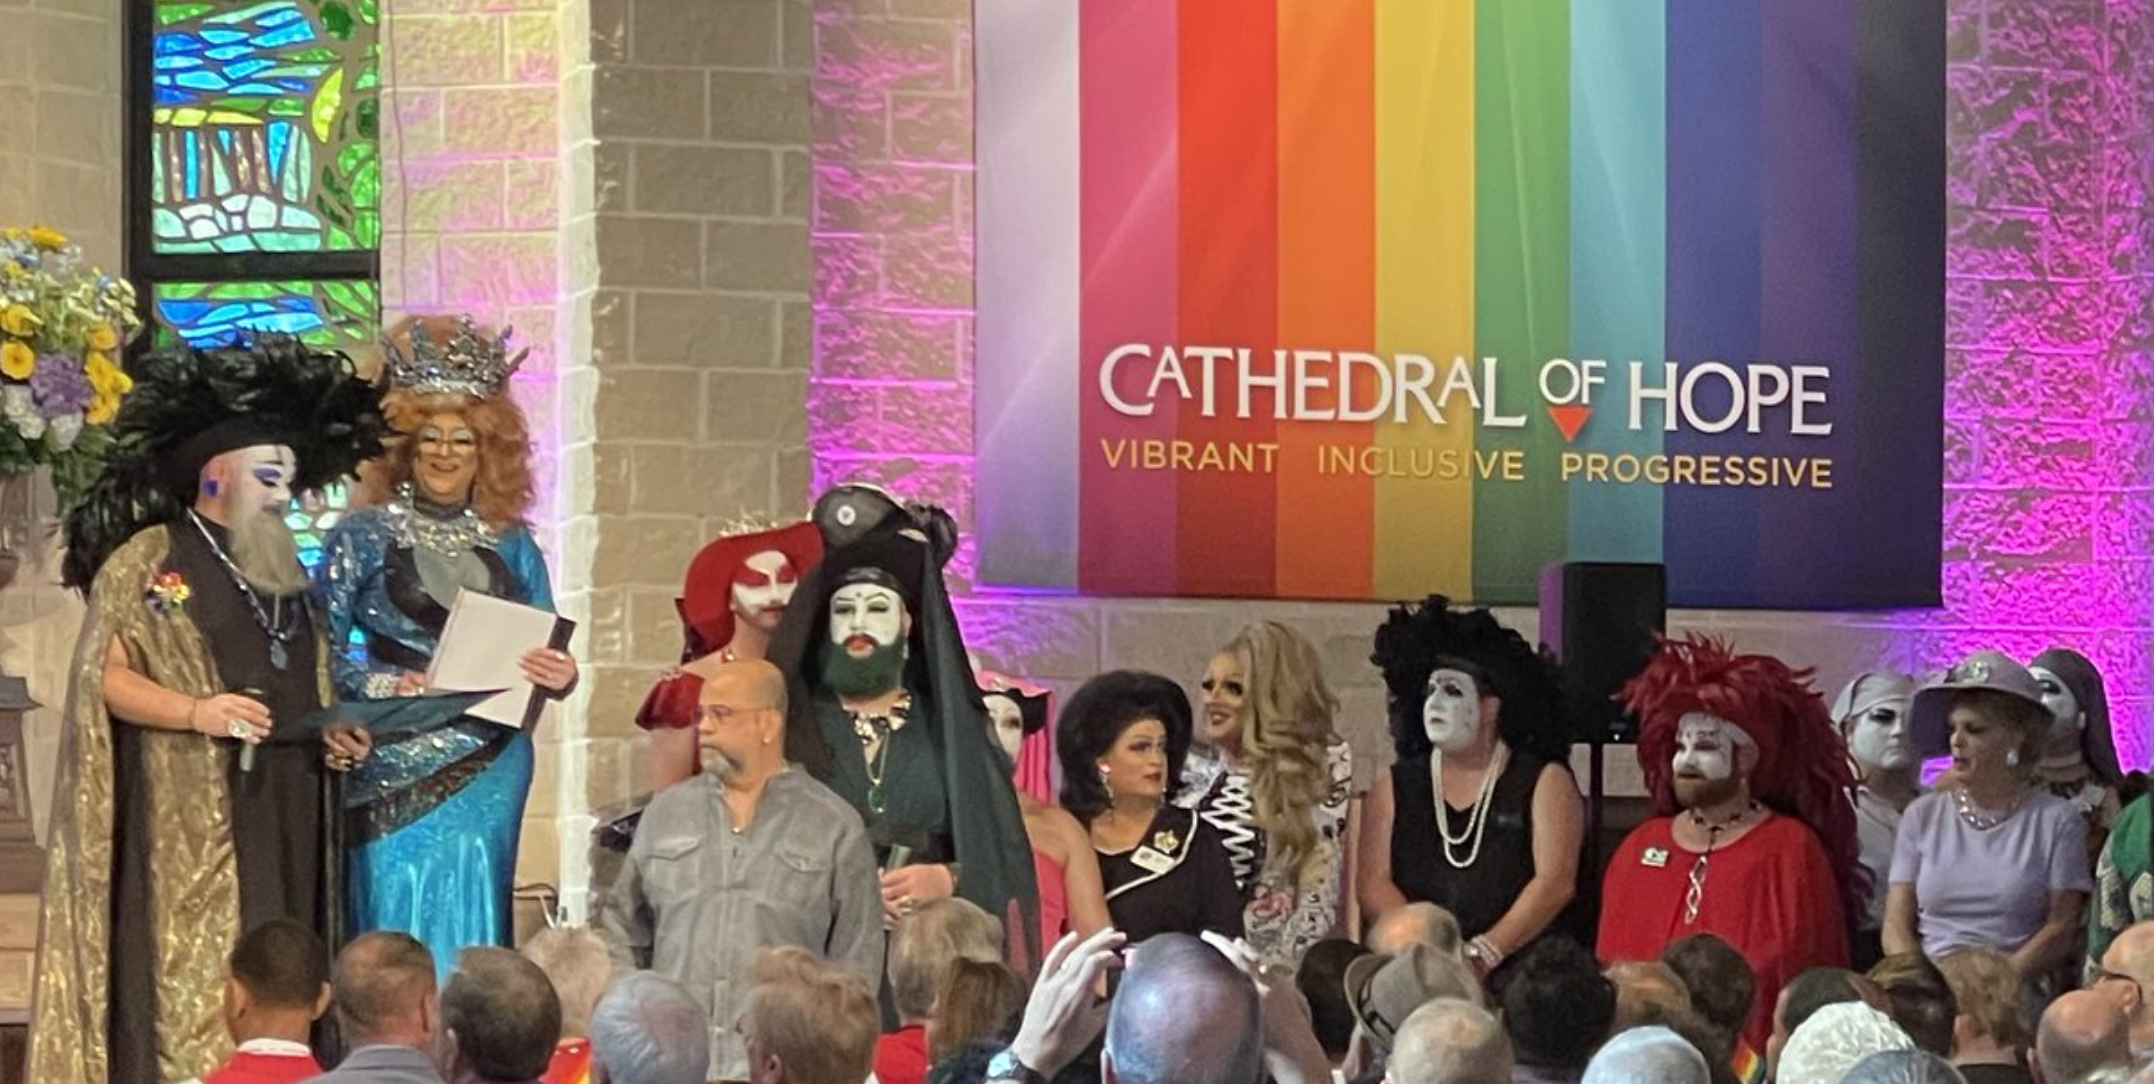 Church in Dallas hosts “Drag Sunday” to “Bless” local Drag Queens